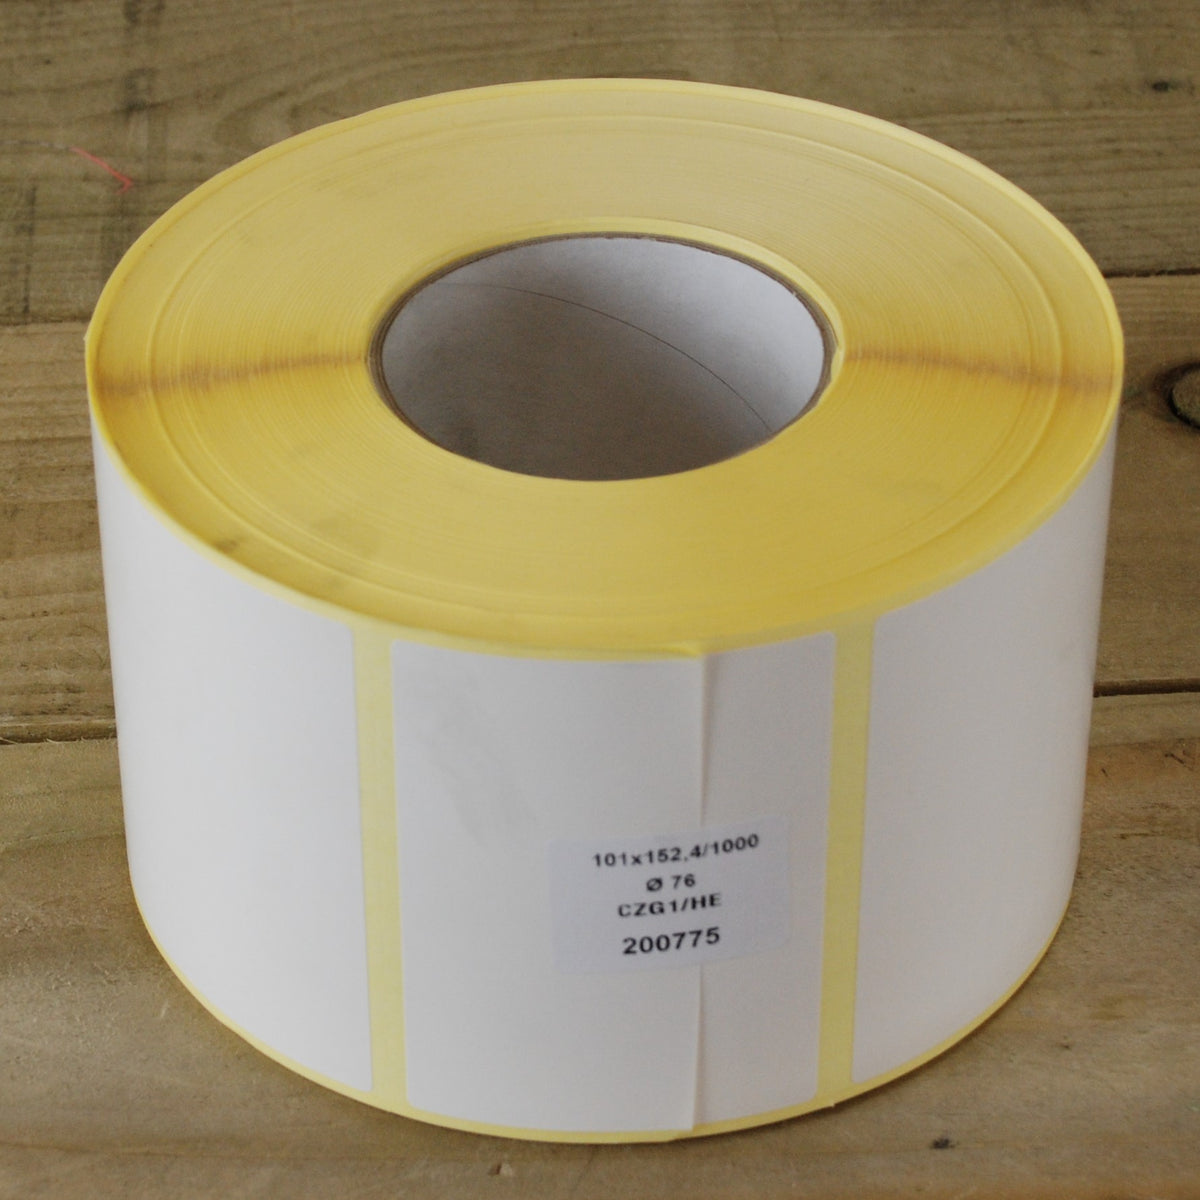 x1000 Large White Self Adhesive Thermal Transfer Labels 101mm x 152.4mm